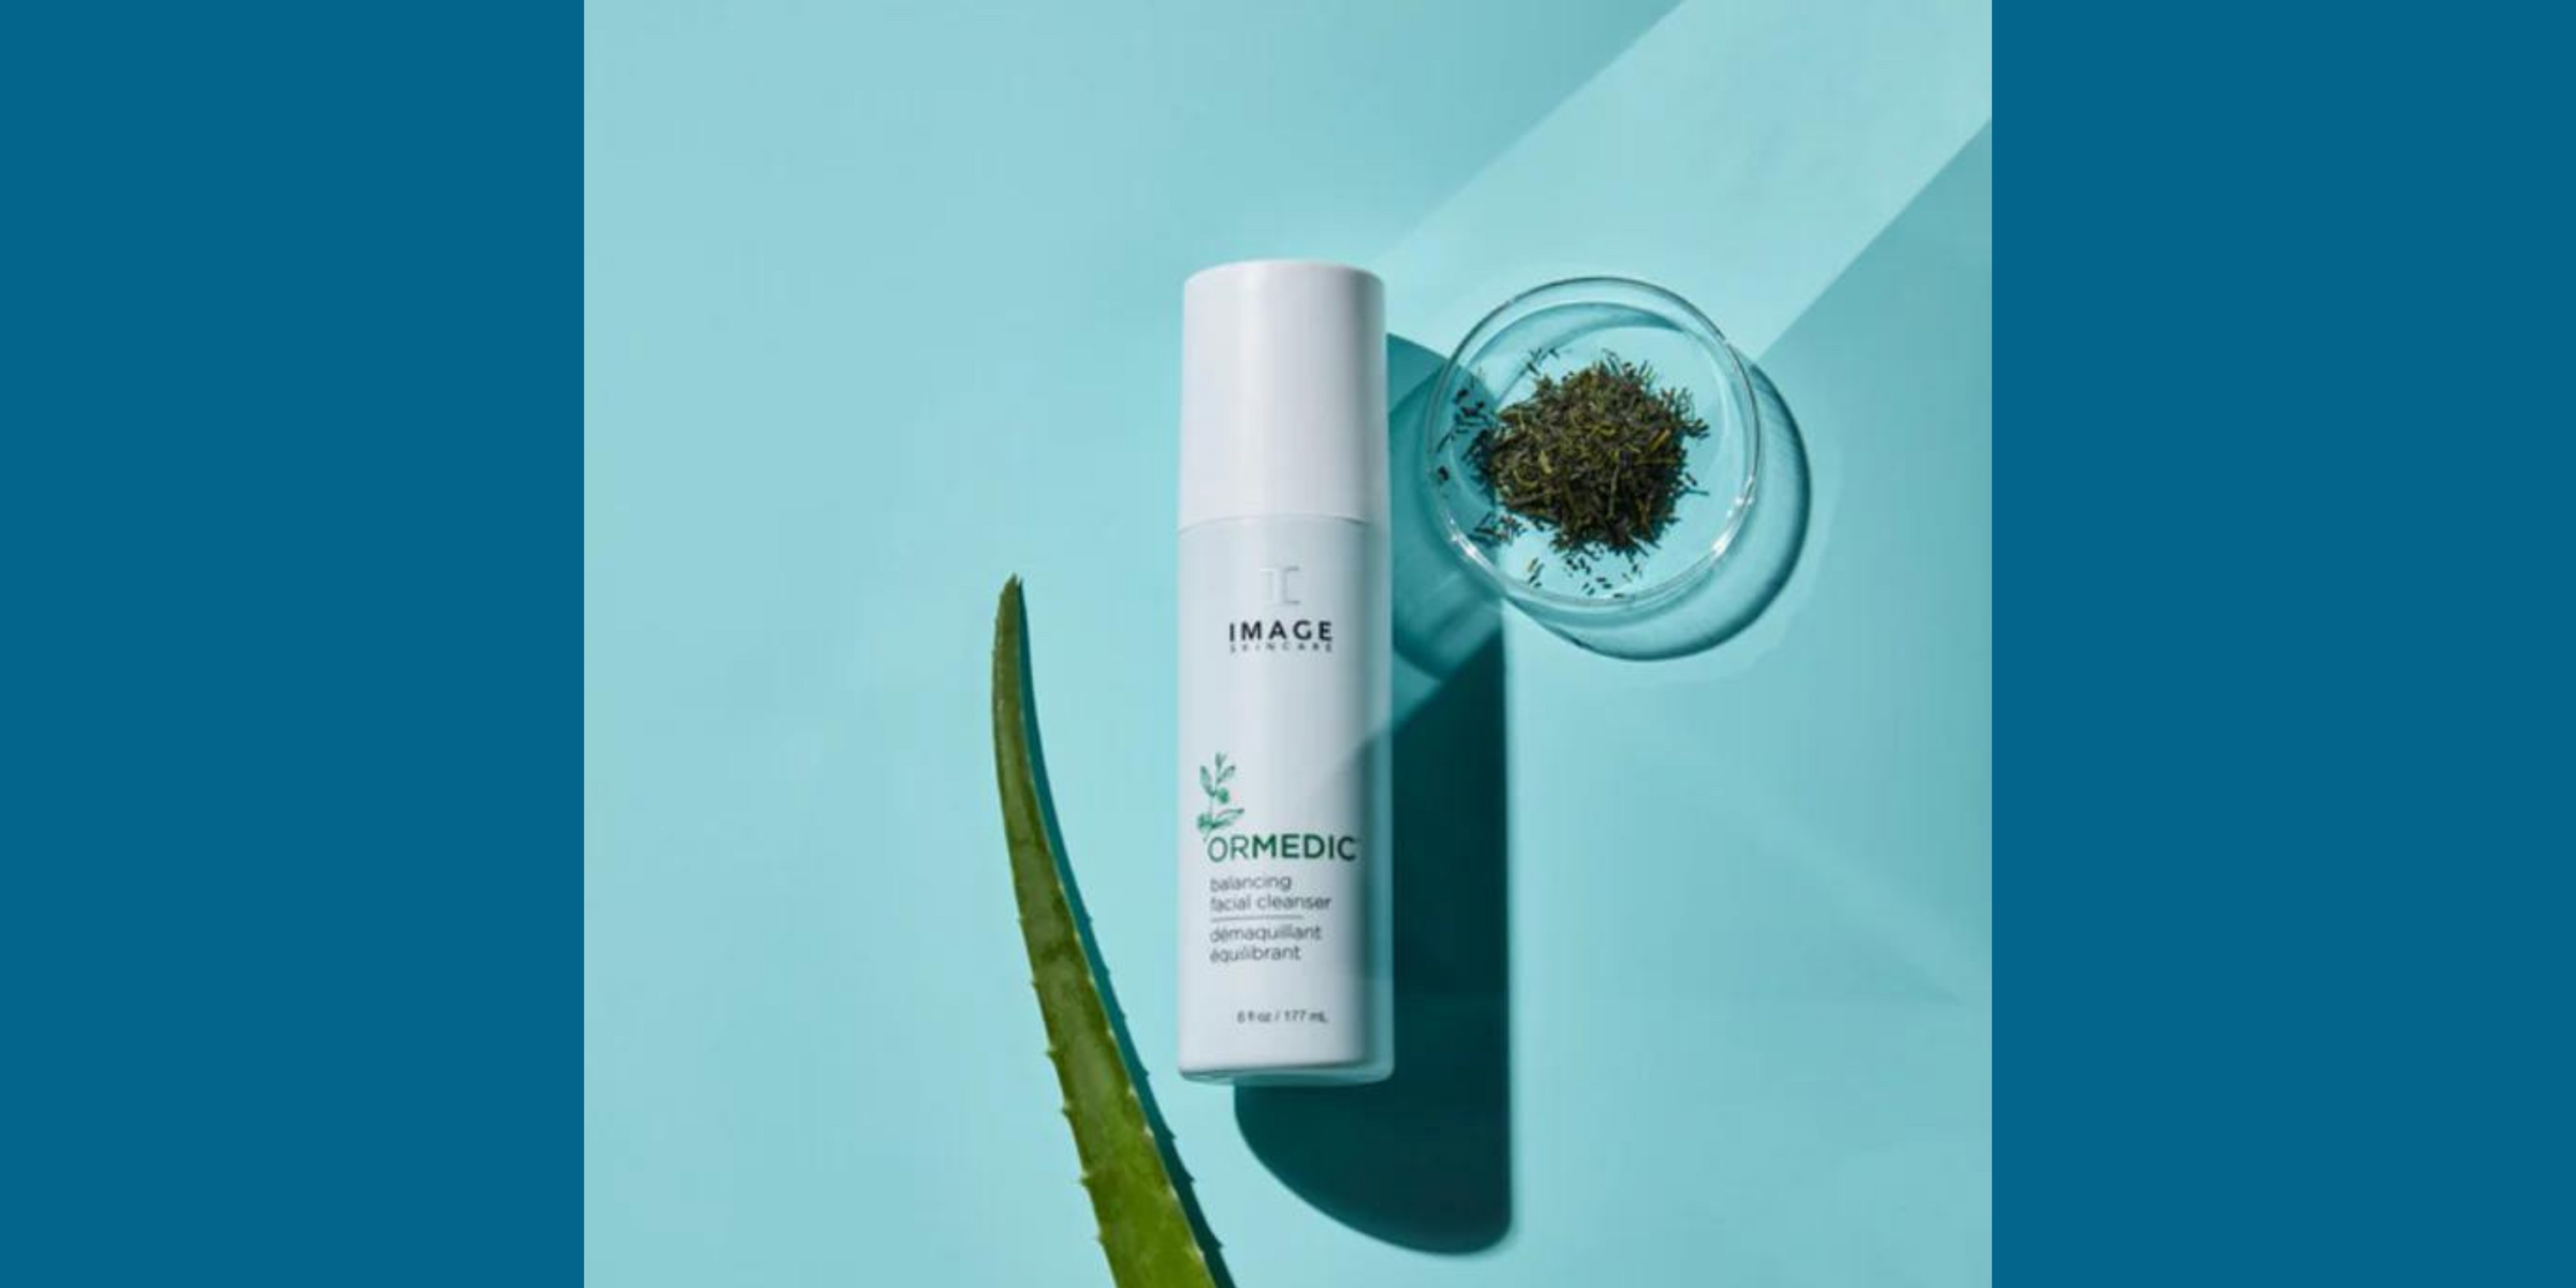 The Pros and Cons of the IMAGE SKINCARE Ormedic Balancing Facial Cleanser